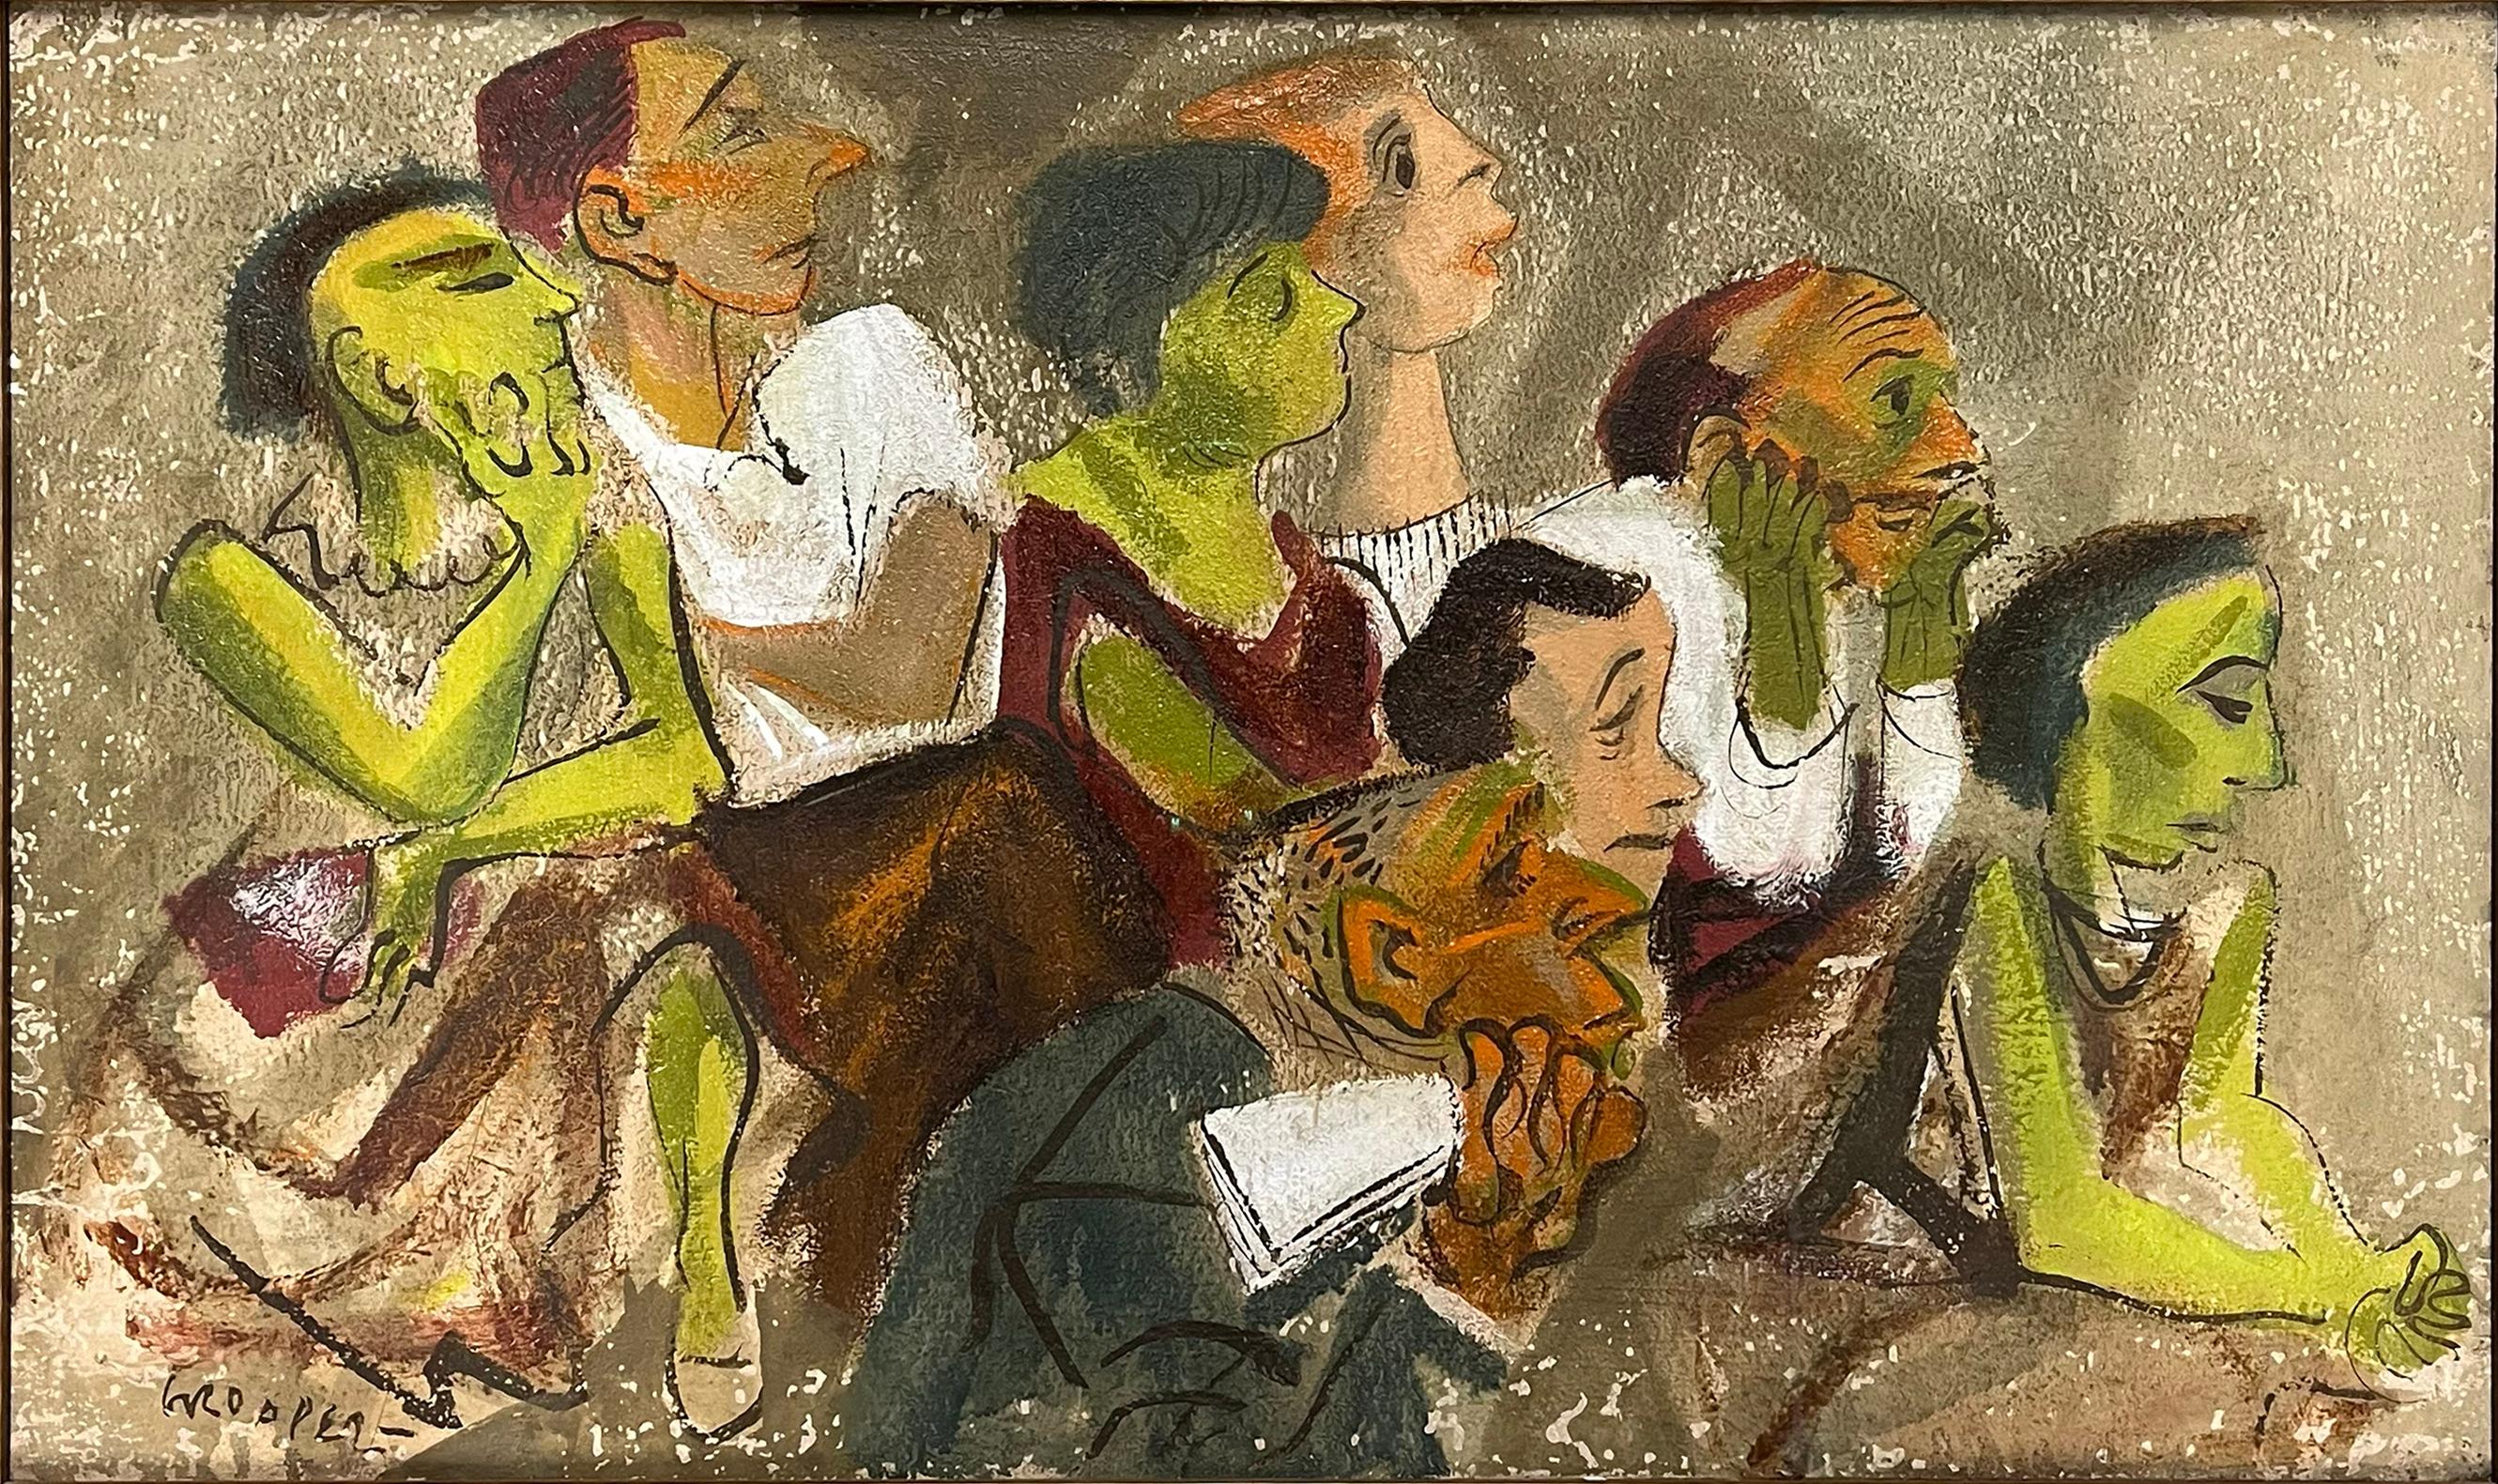 William Gropper Figurative Painting - "Audience" Mid 20th Century American Scene Social Realism Theatre Modern Figures